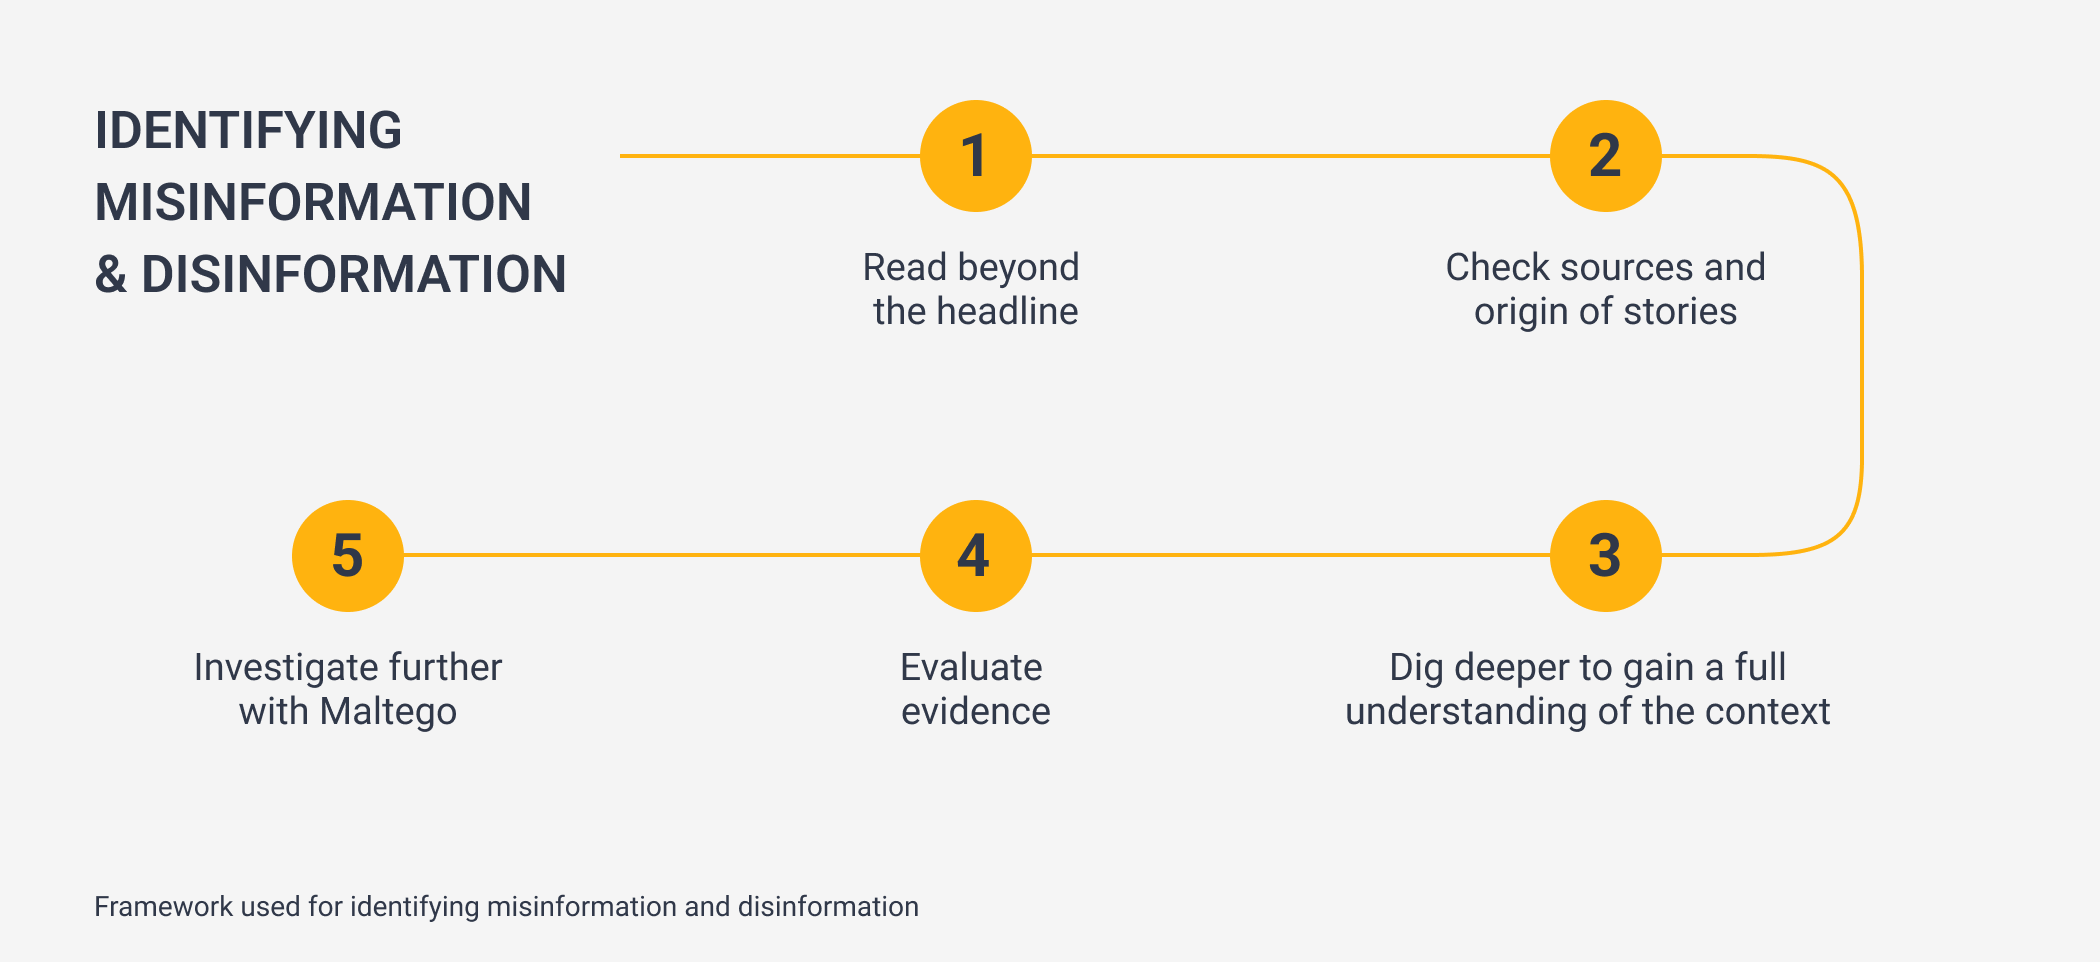 Framework used for identifying misinformation and disinformation